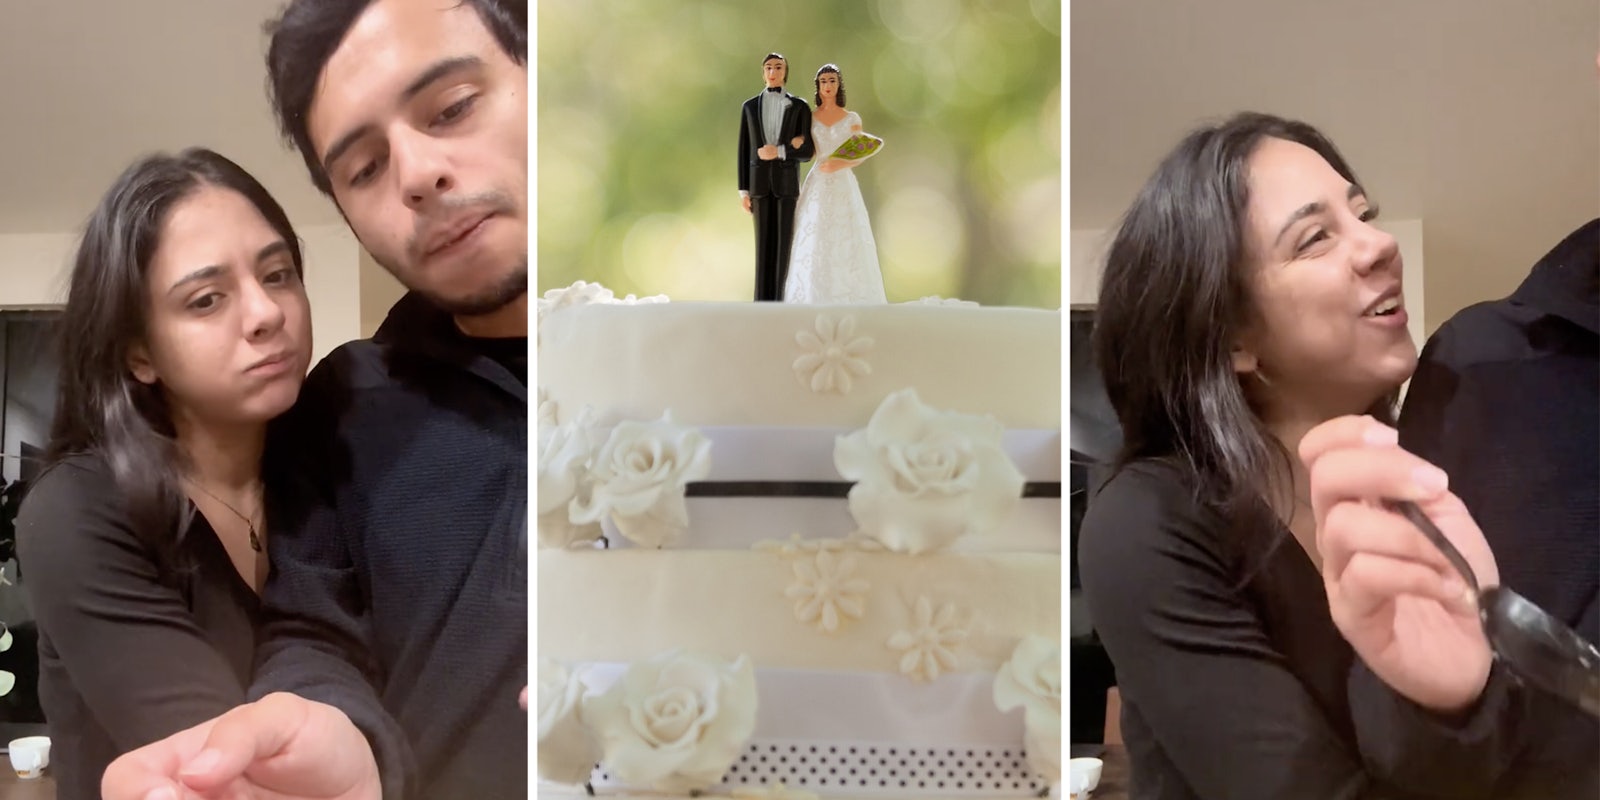 Couple confused(l), Wedding cake(c), Woman laughing(r)